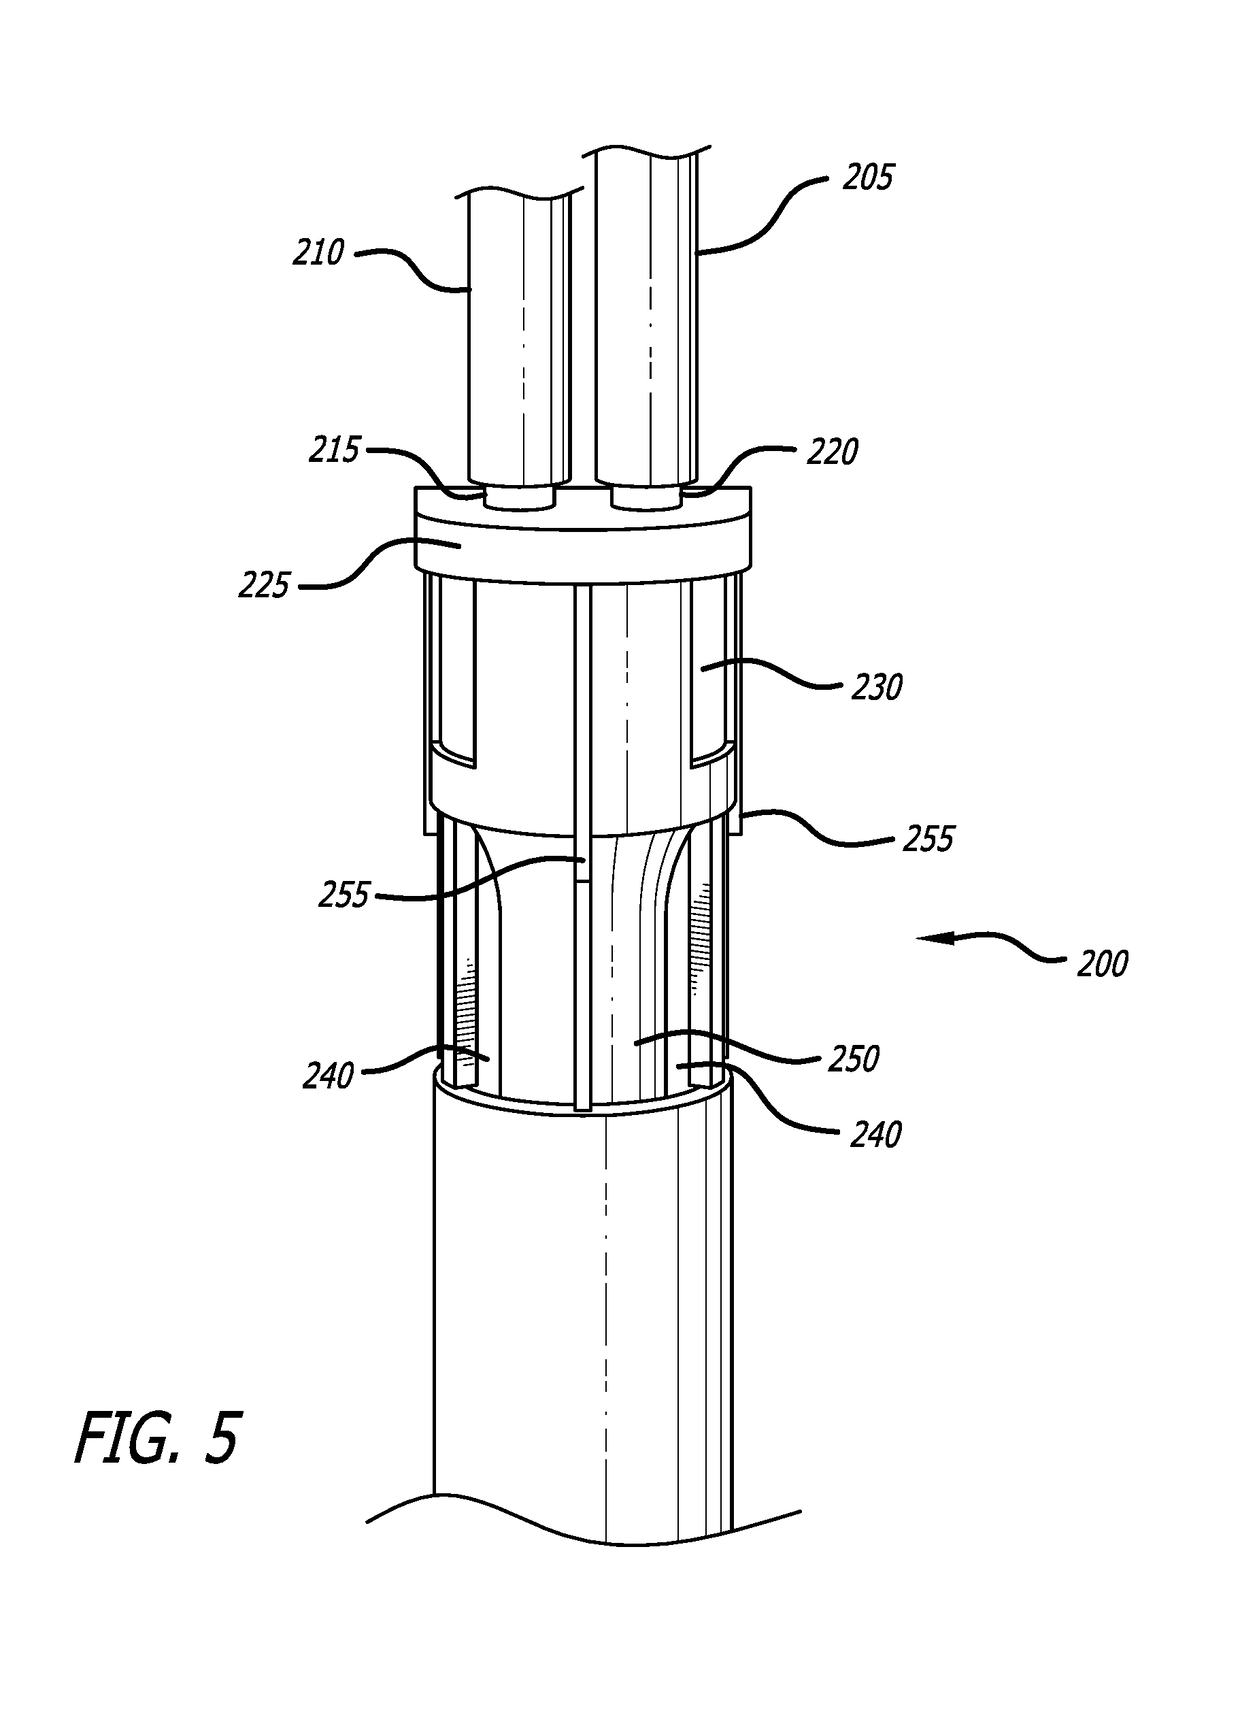 Portable dialysis drainage system and method